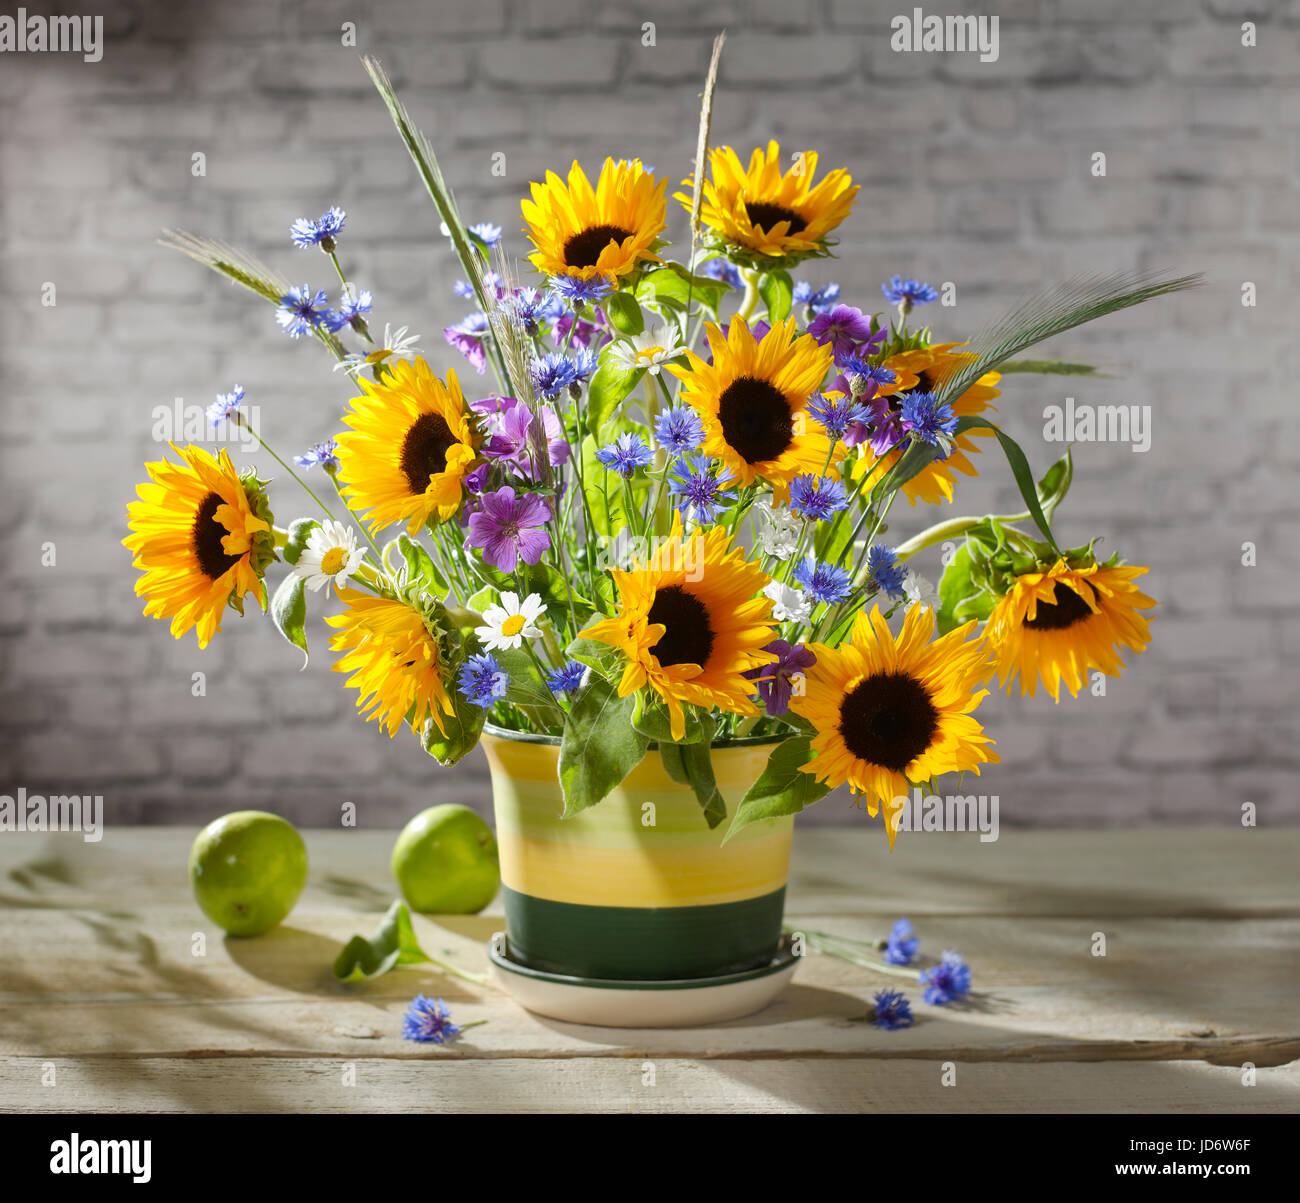 Bouquet of flowers with sunflowers. Stock Photo